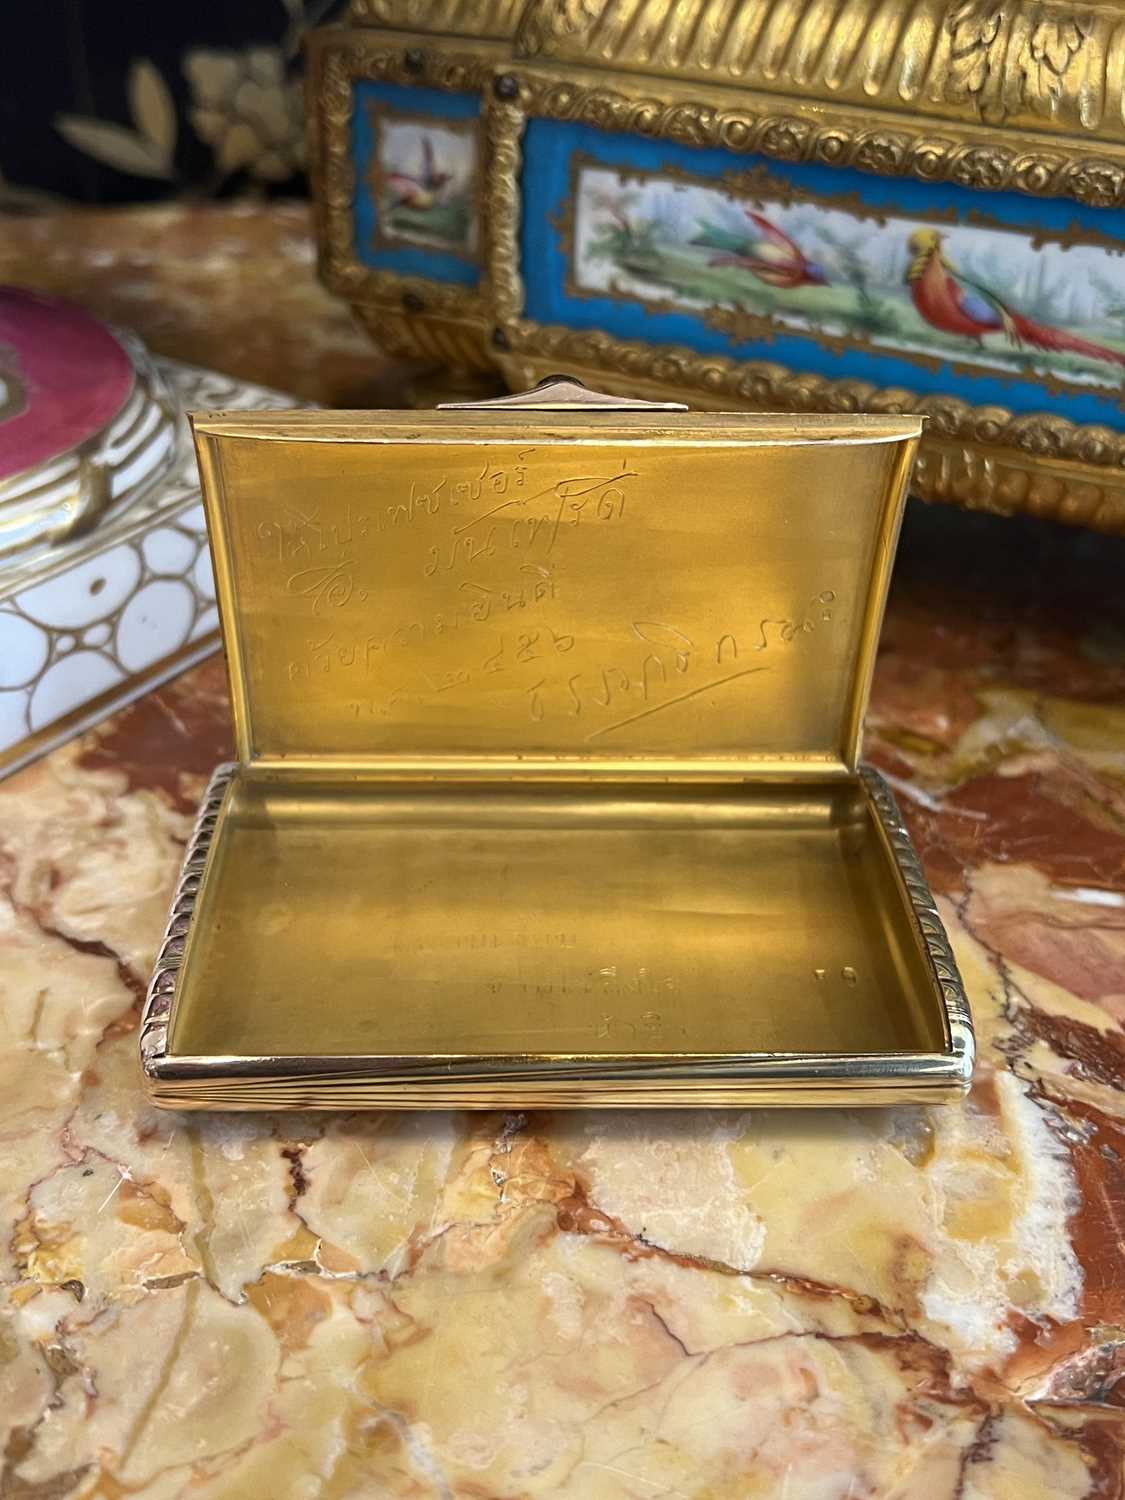 A 14CT GOLD AND SAPPHIRE ANTIQUE RUSSIAN CIGARETTE CASE BY ABRAHAM BEILIN, 1908-1917 - Image 9 of 9